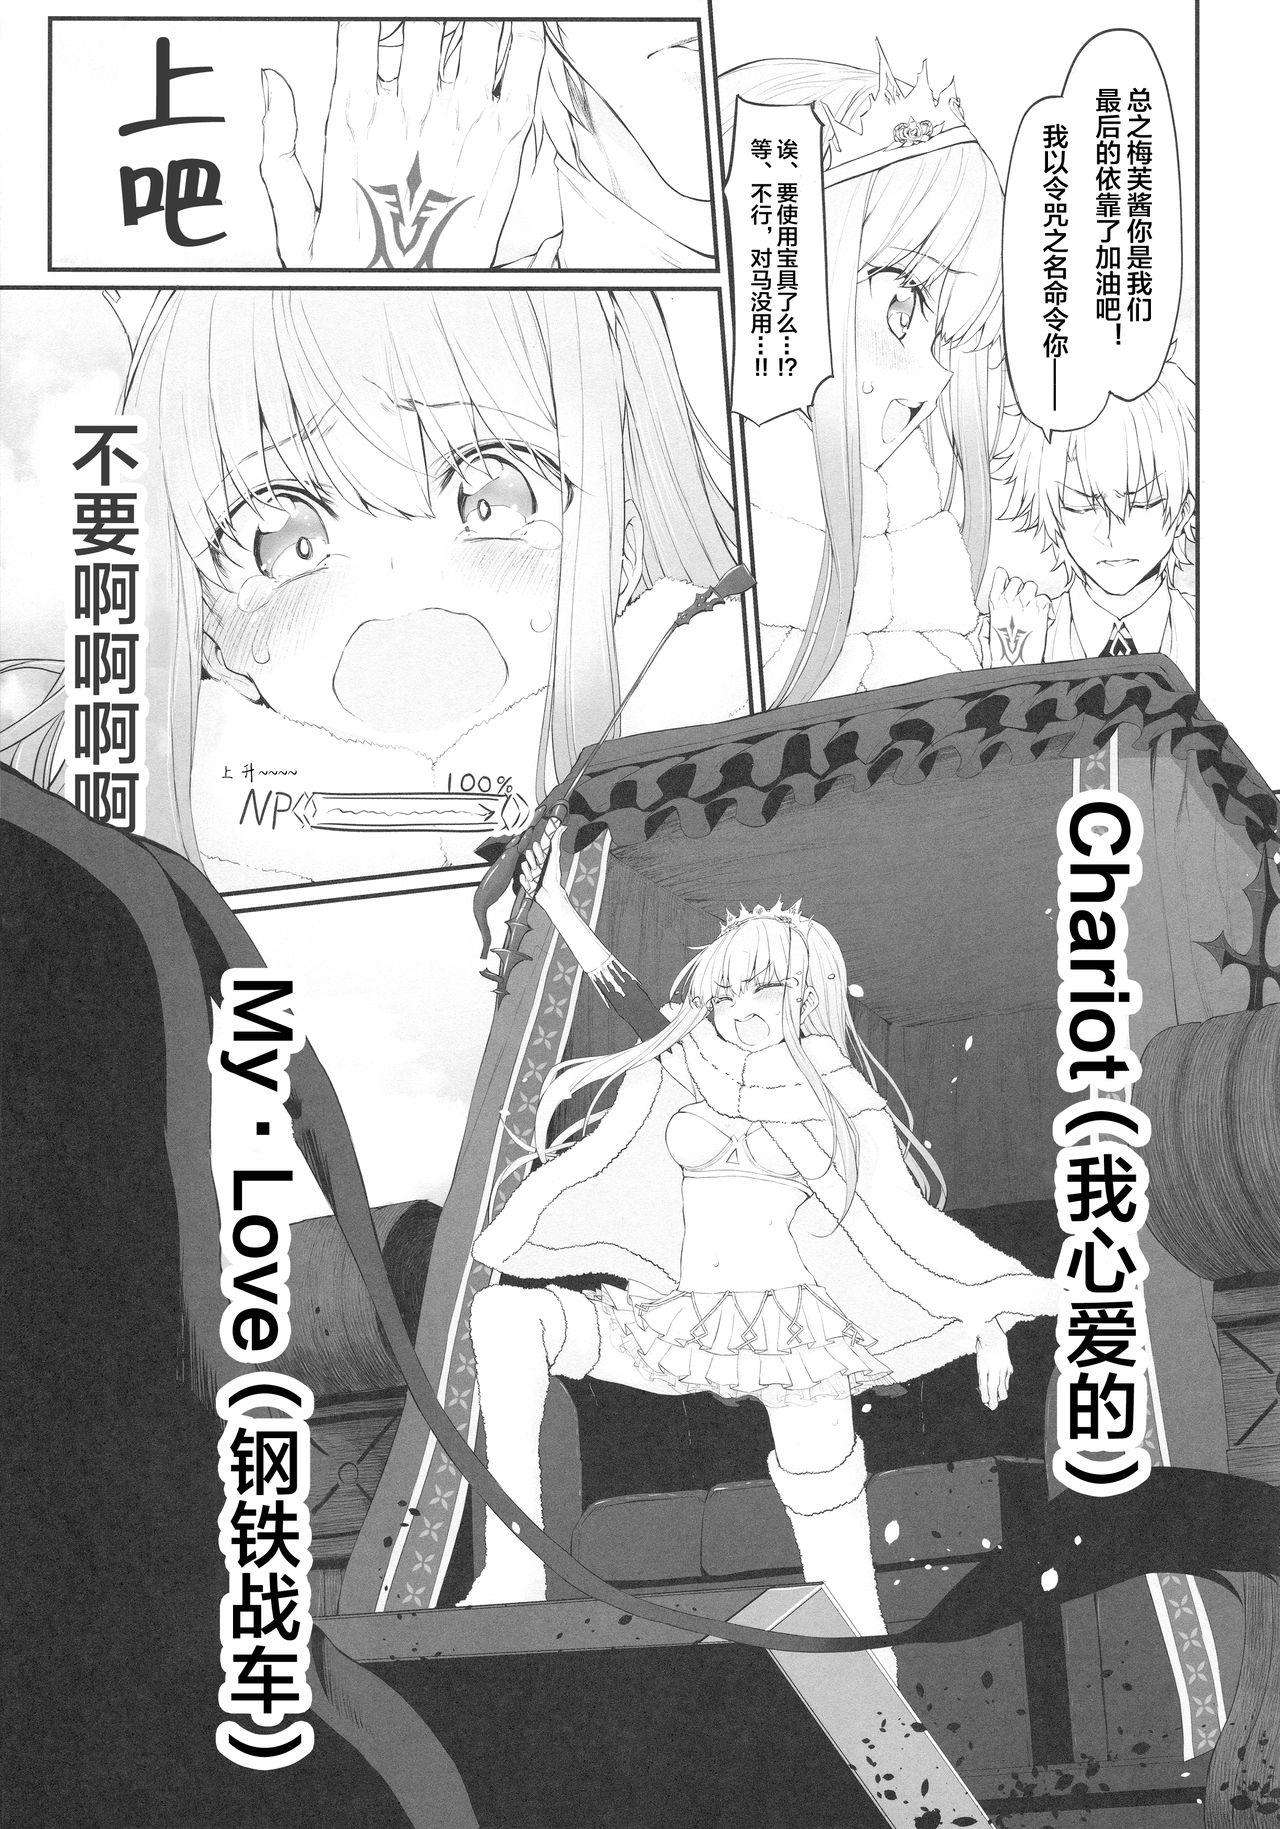 Tanned Marked Girls Vol. 16 - Fate grand order Oriental - Page 5